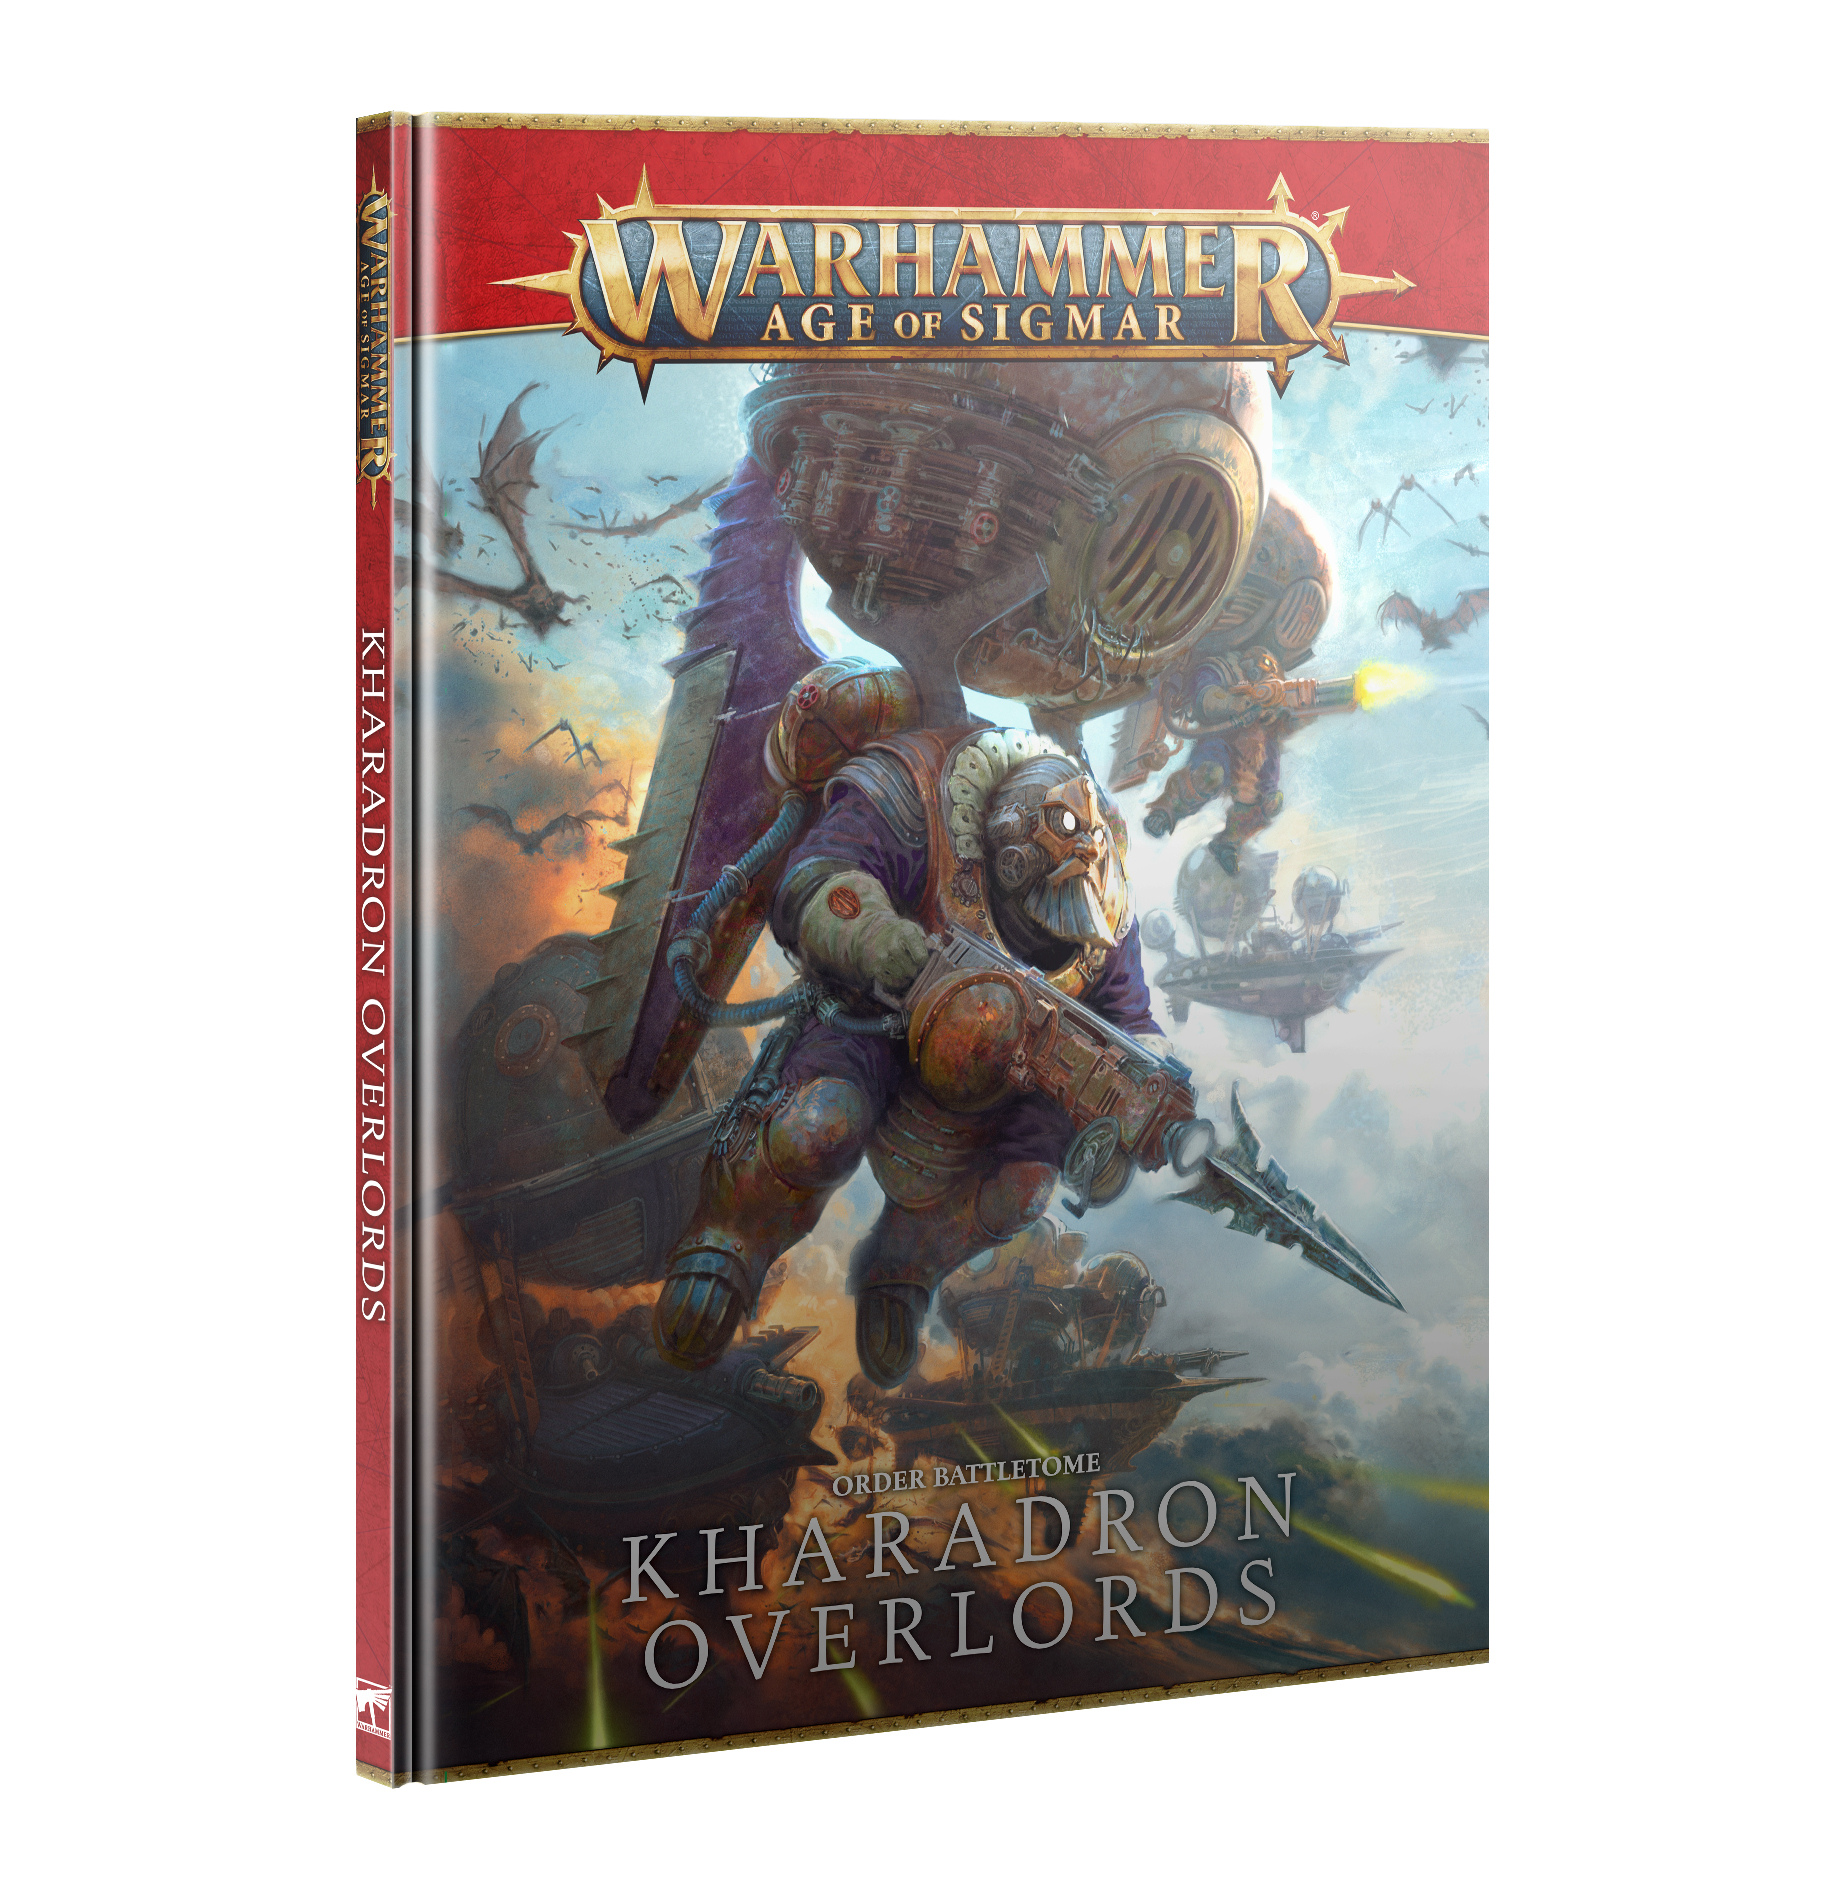 Warhammer Age of Sigmar: Battletome: Kharadron Overlords  (HB) 